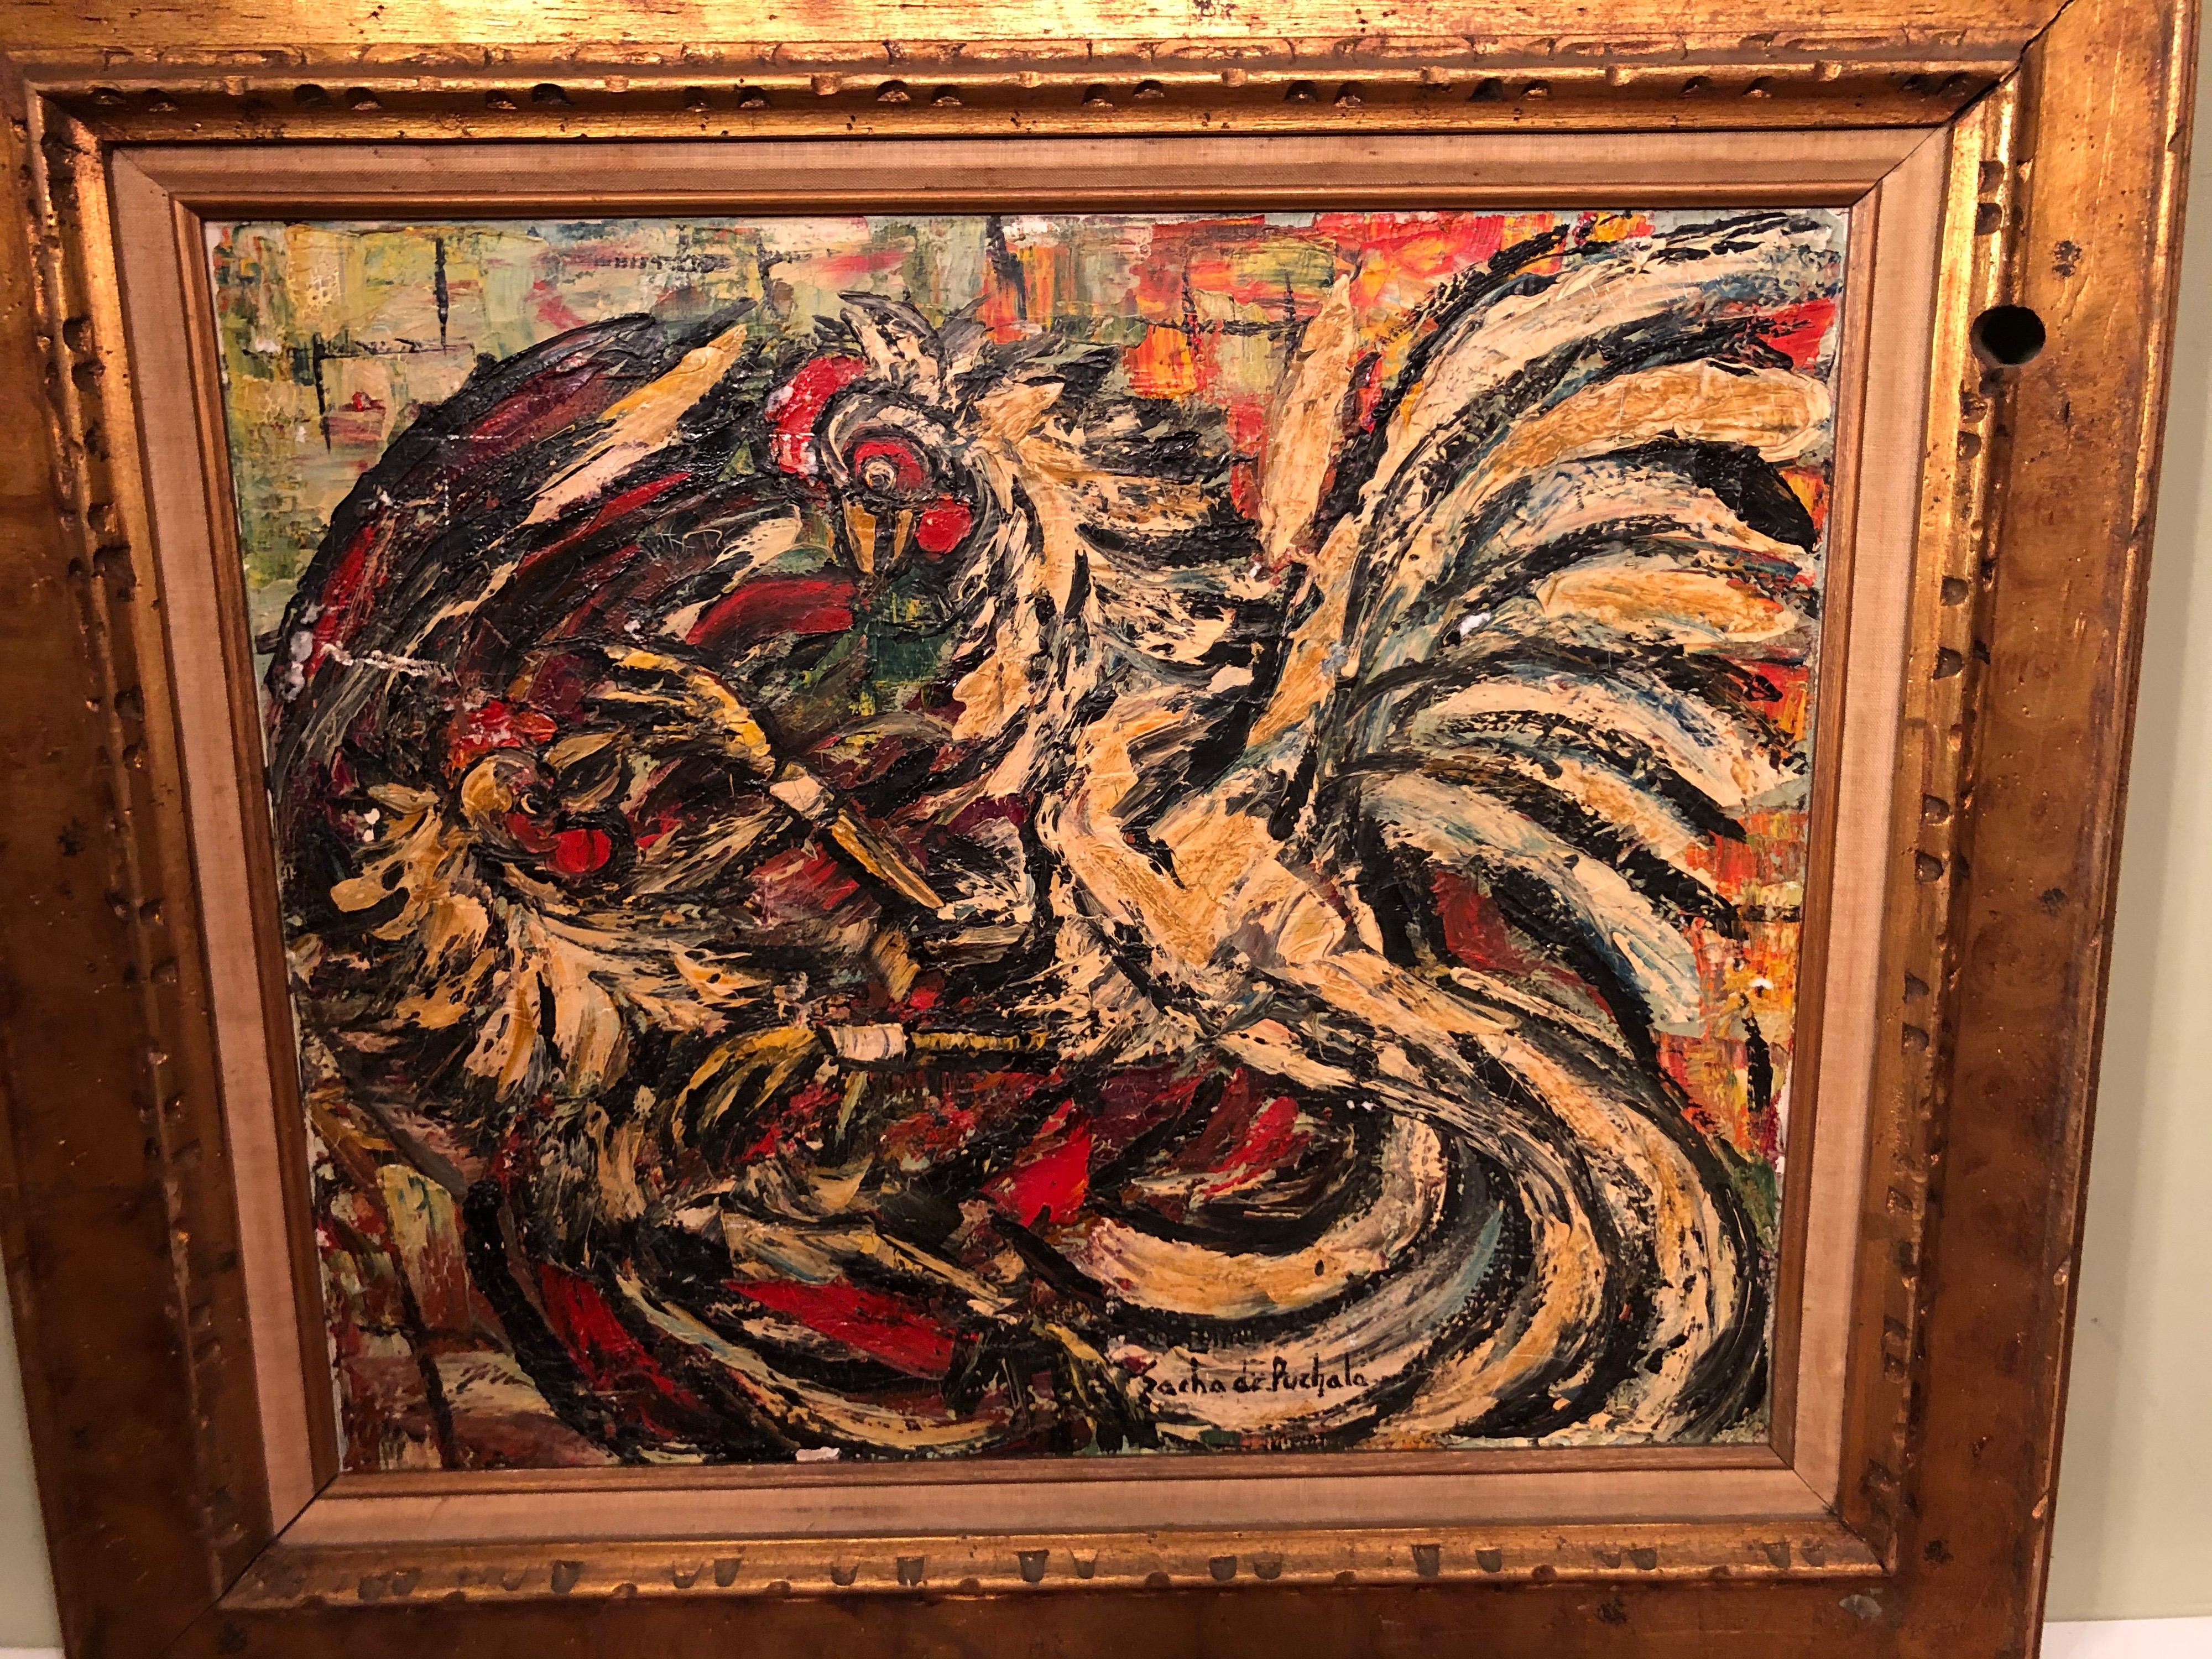 Sascha De Puchala Abstract of Roosters In Good Condition For Sale In Redding, CT